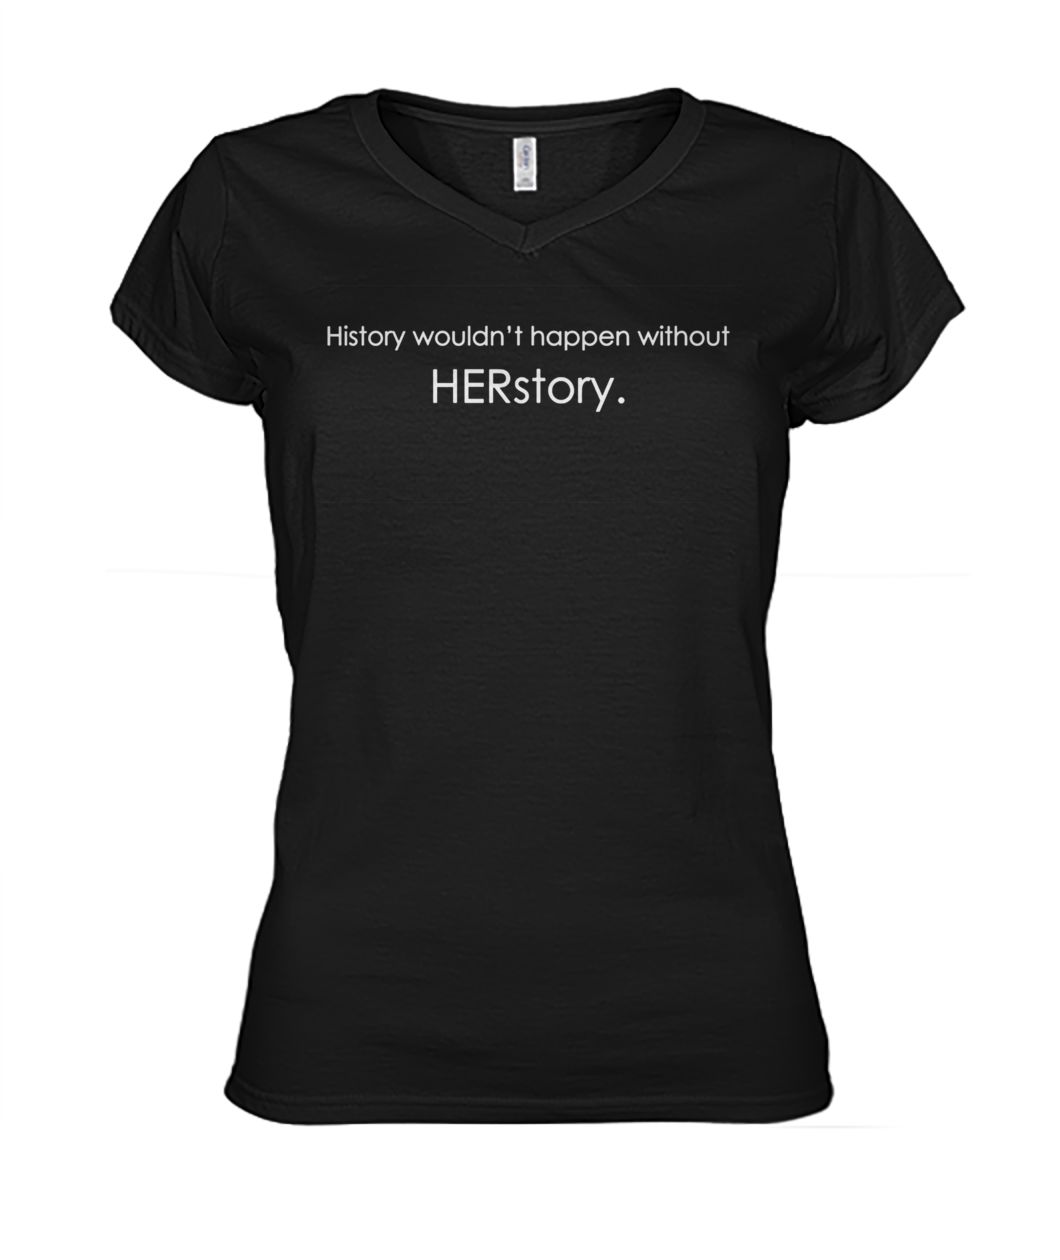 History wouldn't happen without herstory women's v-neck